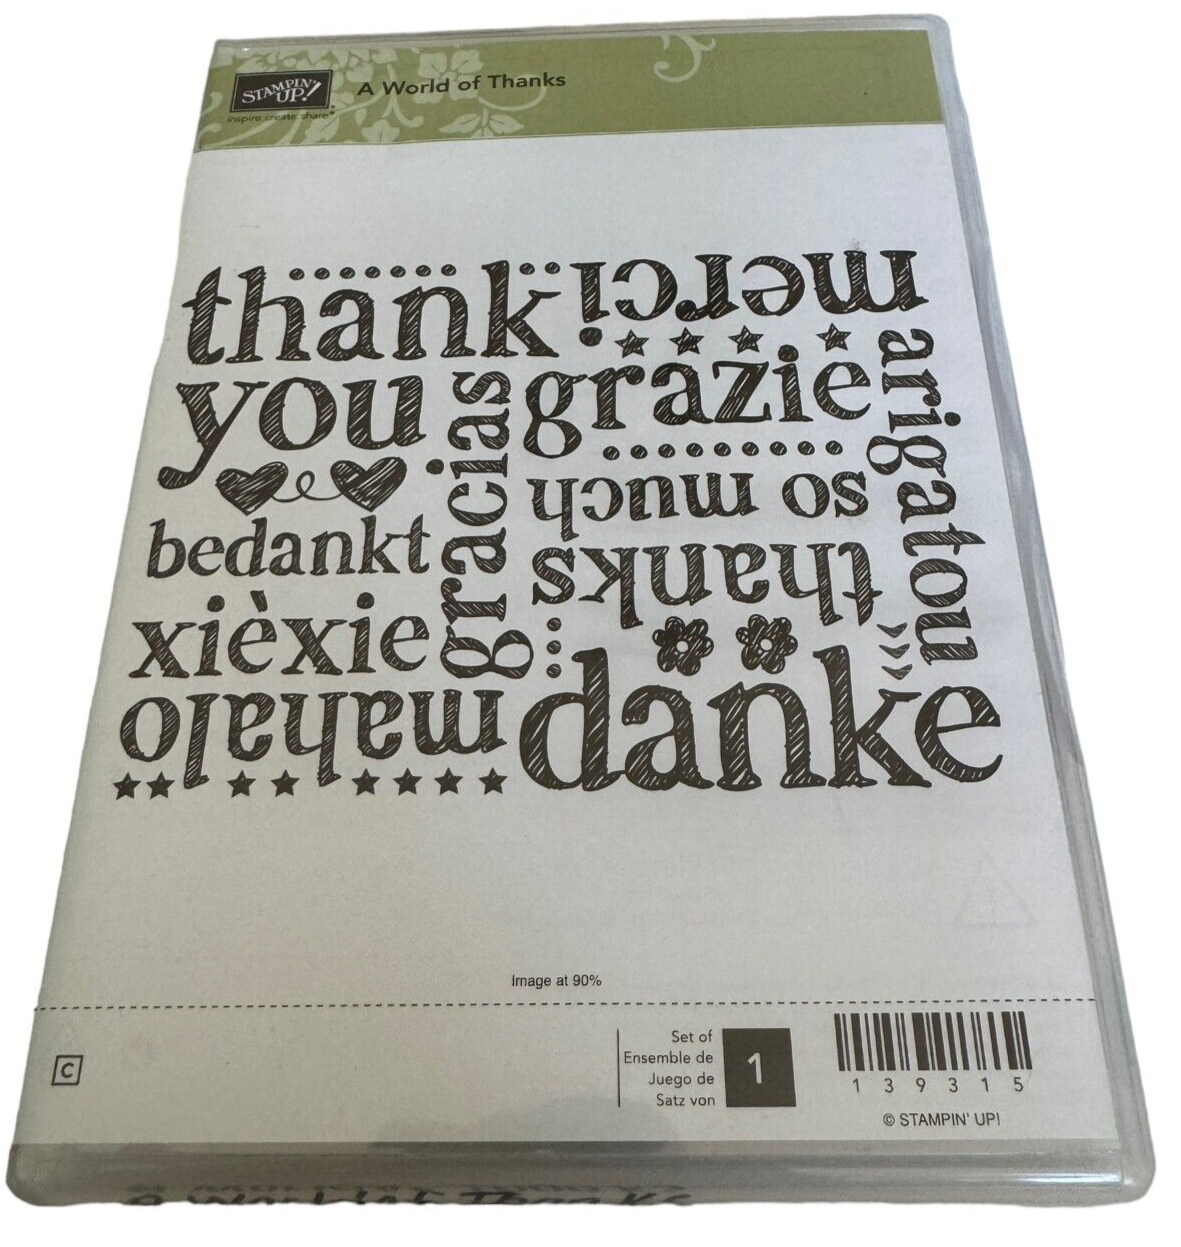 Stampin Up Cling Stamp A World of Thanks Thank You in Foreign Languages Mahalo - $5.99